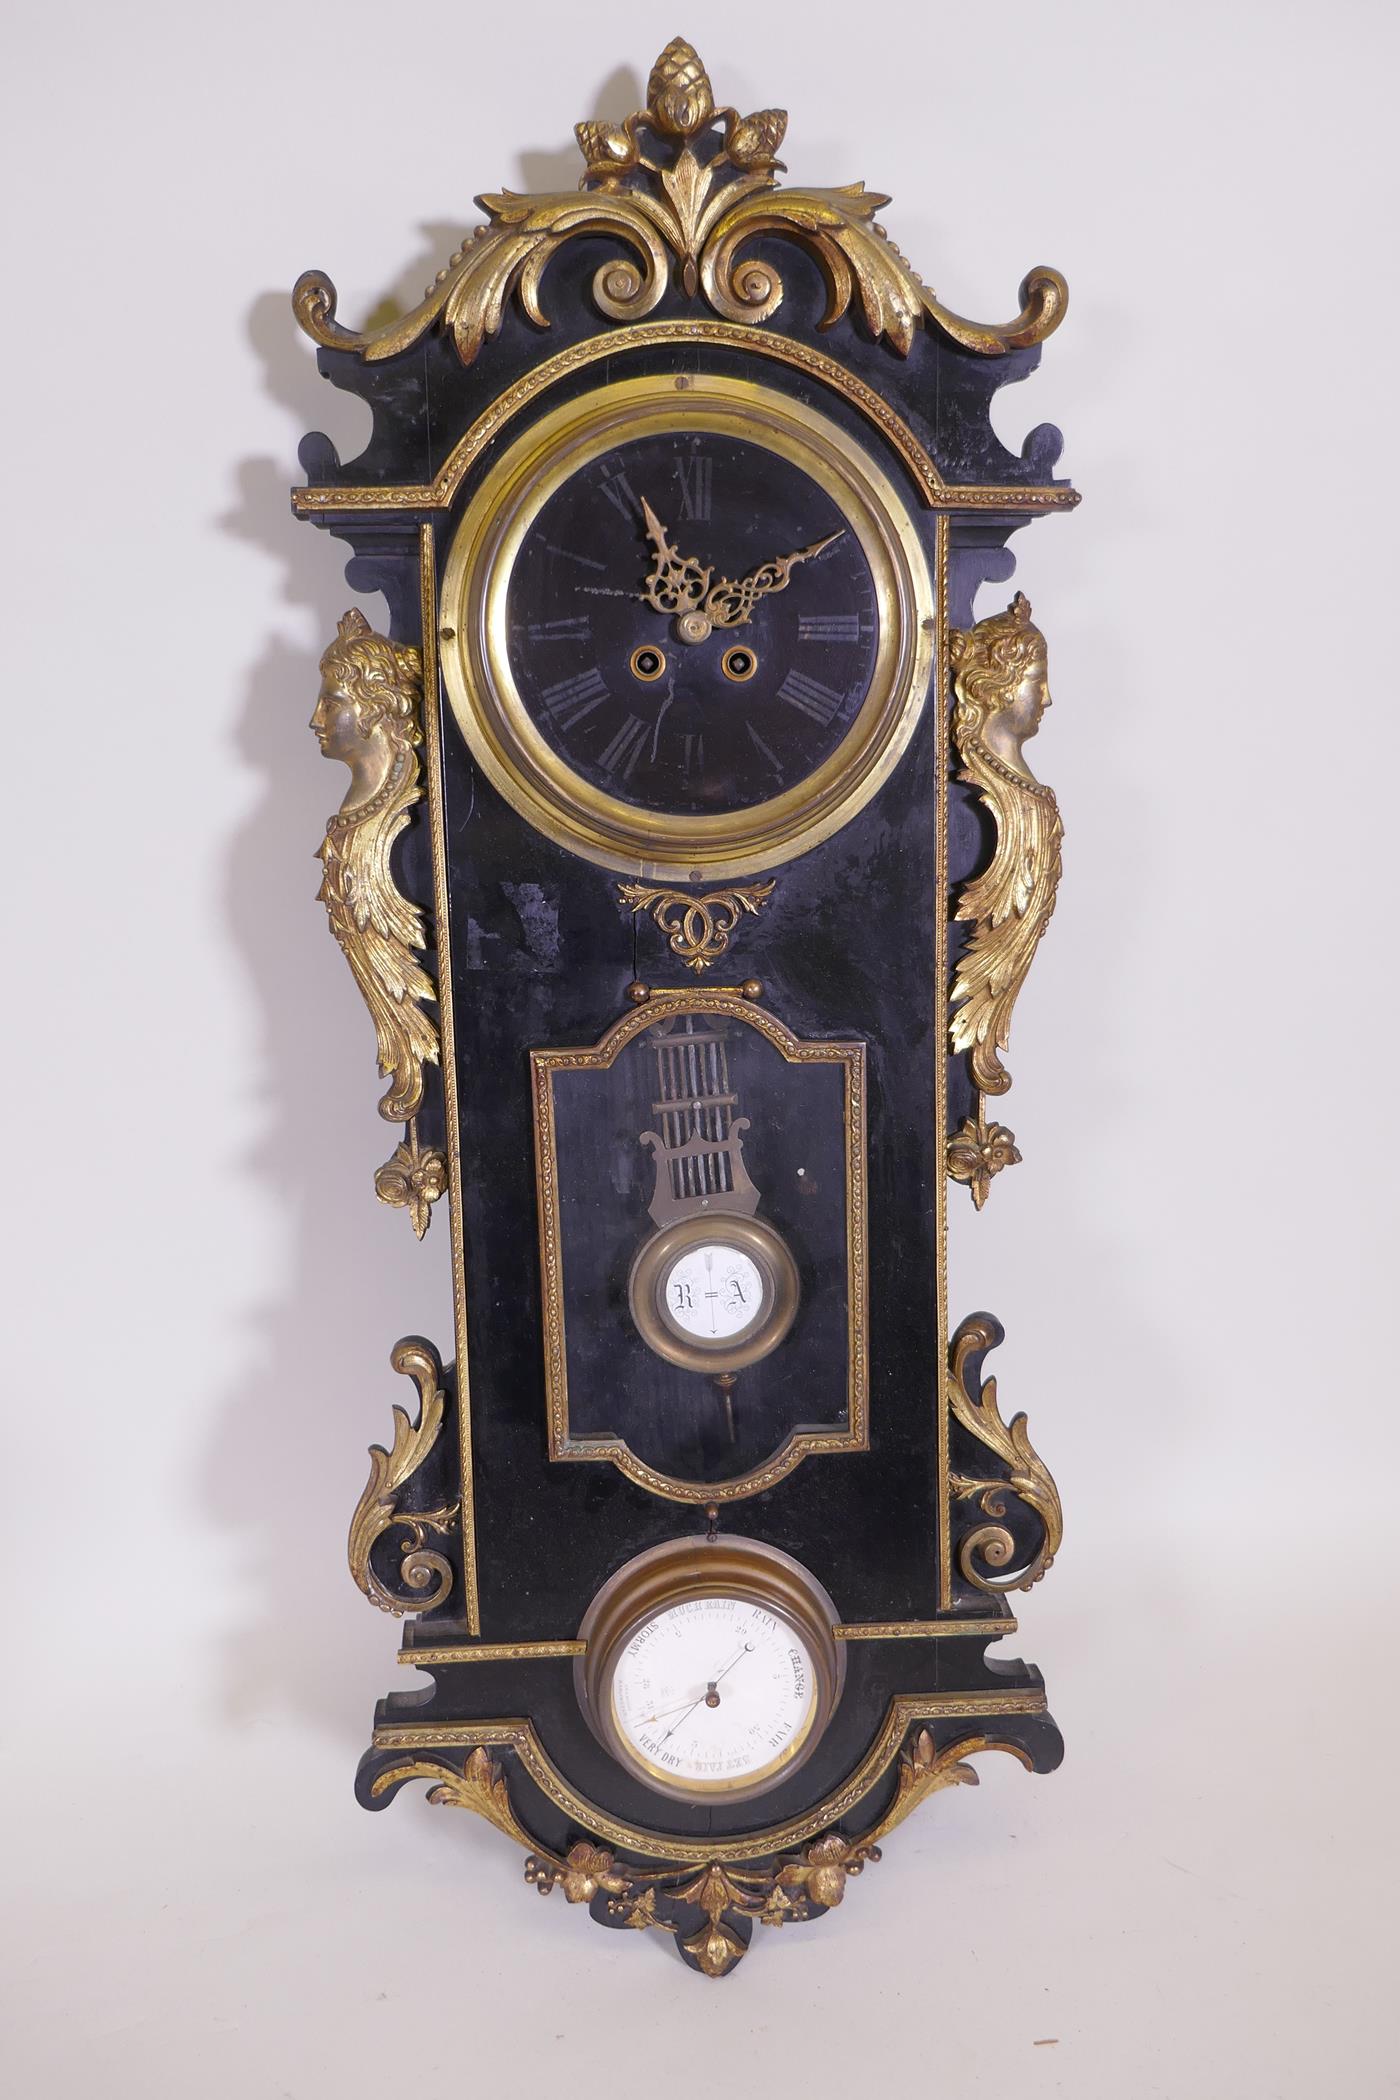 An antique ormolu and ebonised wood cased wall clock and barometer, the spring driven movement